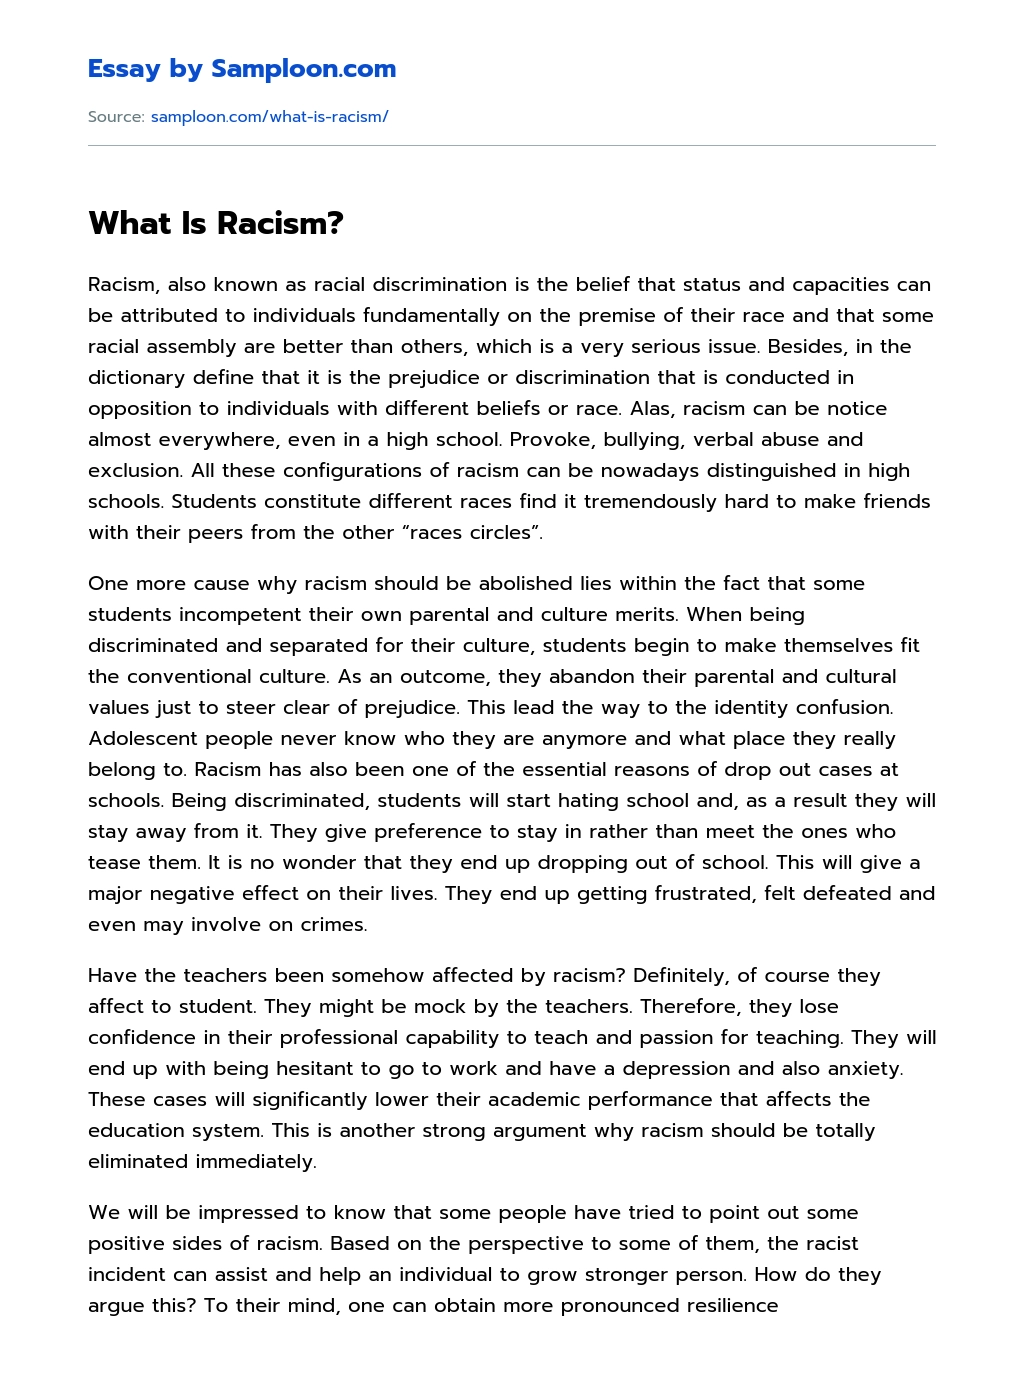 What Is Racism? essay